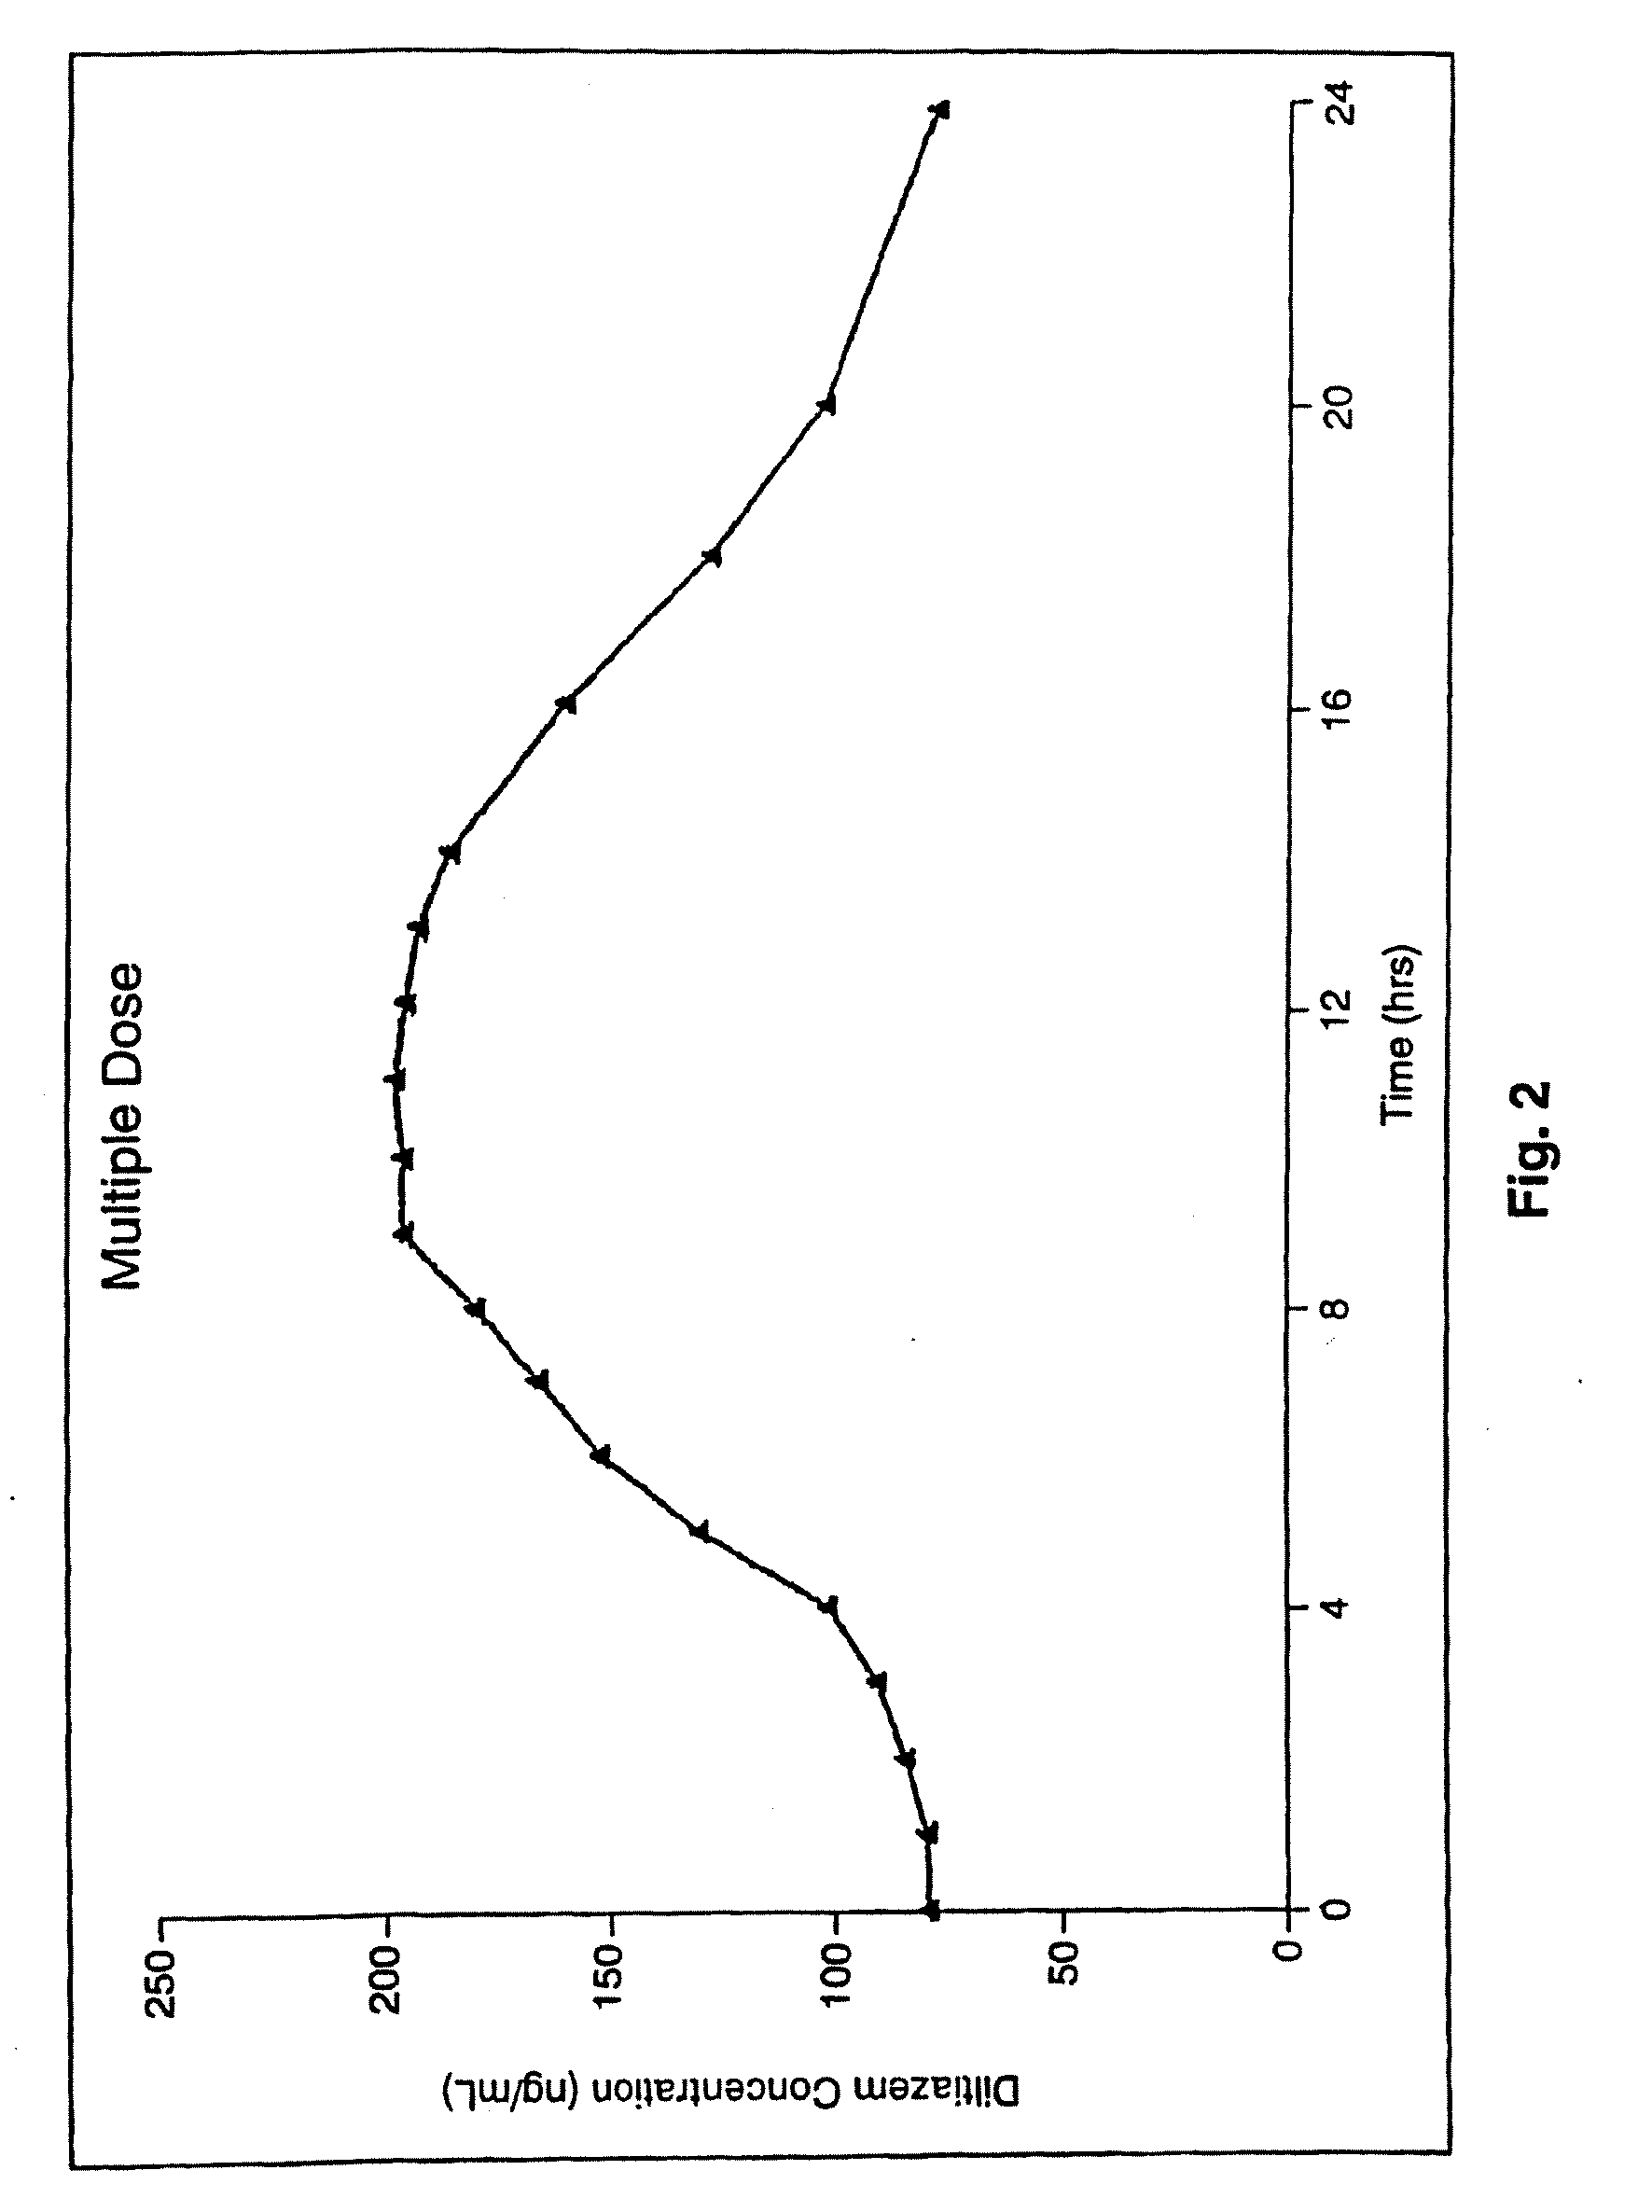 Chronotherapeutic diltiazem formulations and the administration thereof